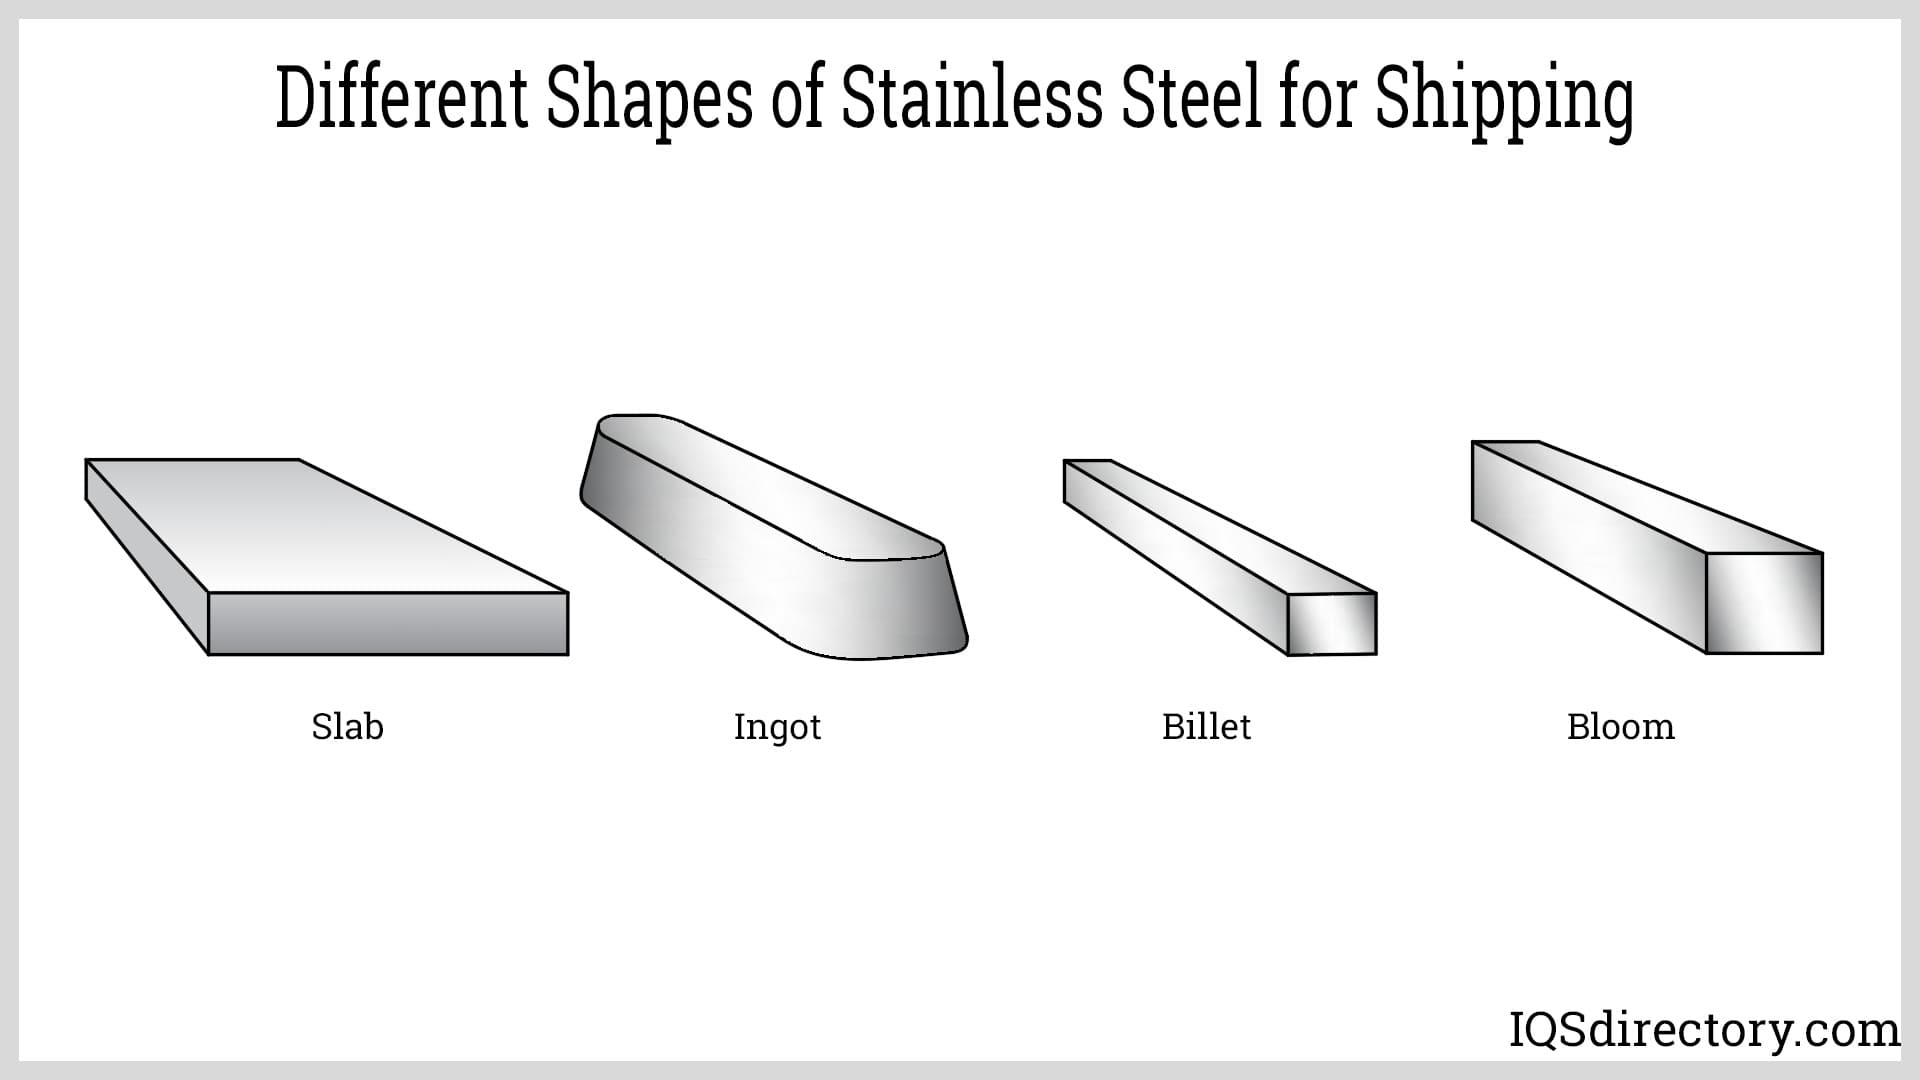 Different Shapes of Stainless Steel for Shipping